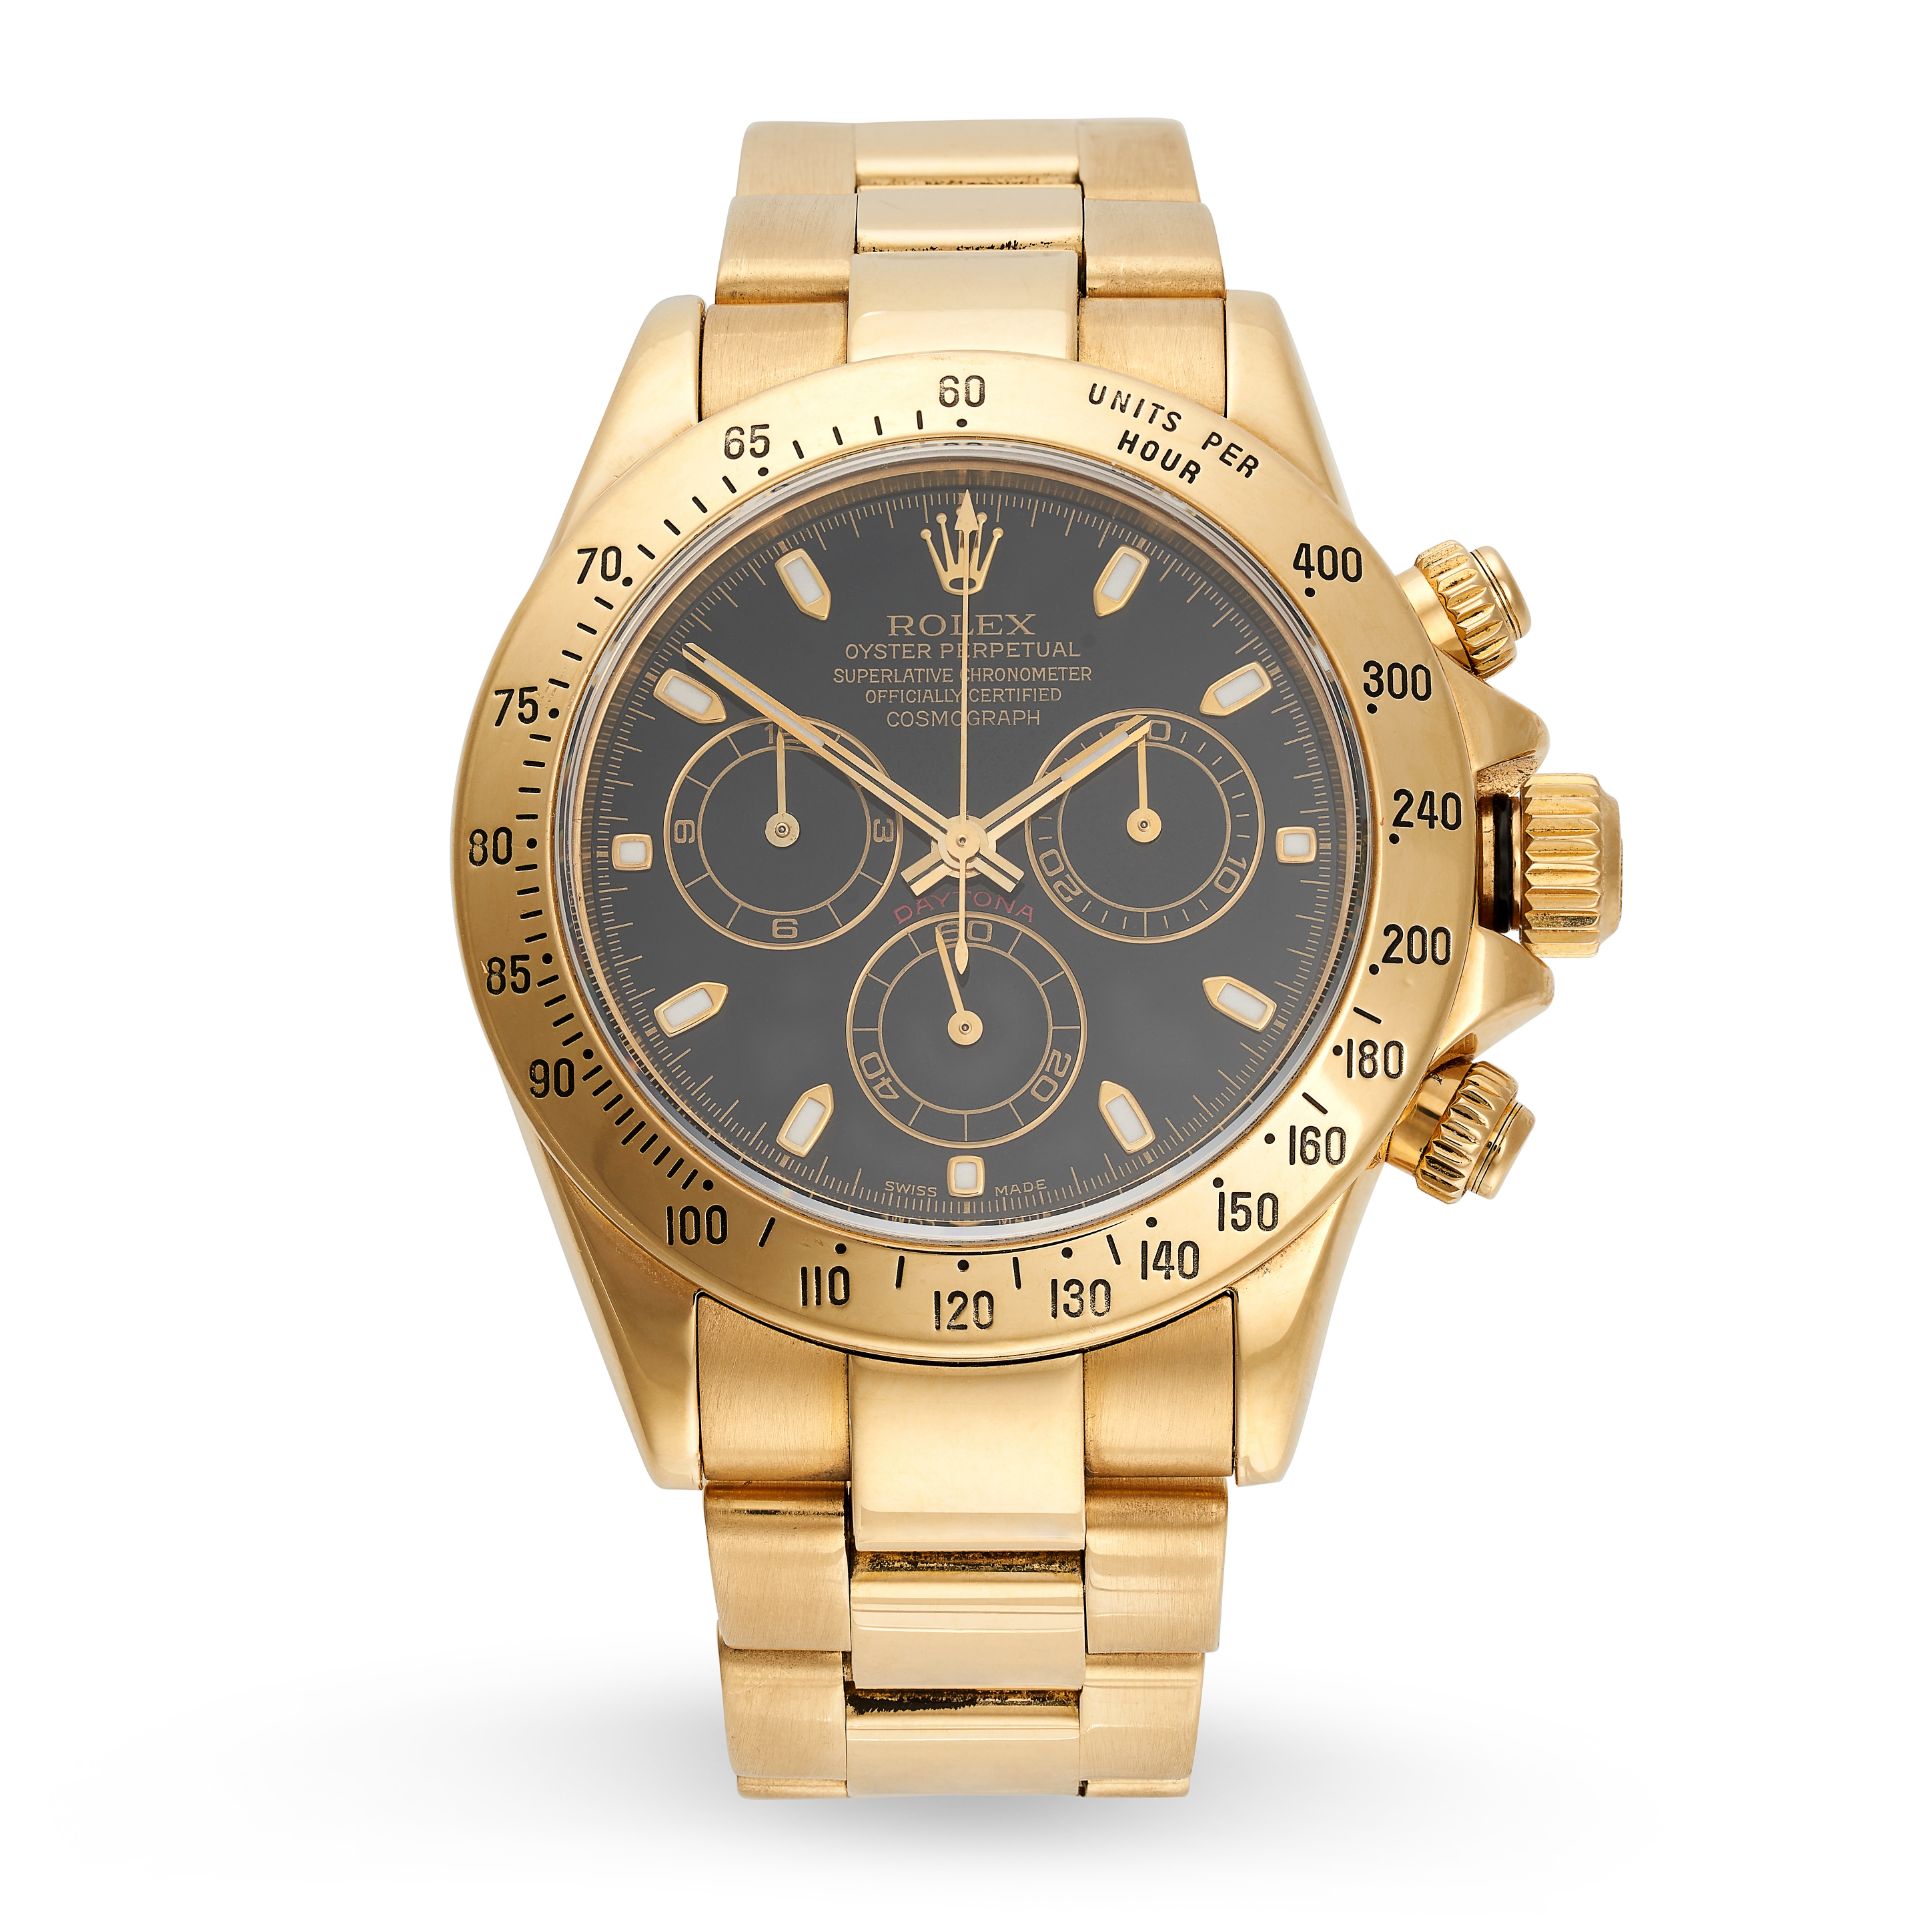 ROLEX, A VINTAGE OYSTER PERPETUAL DAYTONA COSMOGRAPH WRISTWATCH in 18ct yellow gold, with black d...